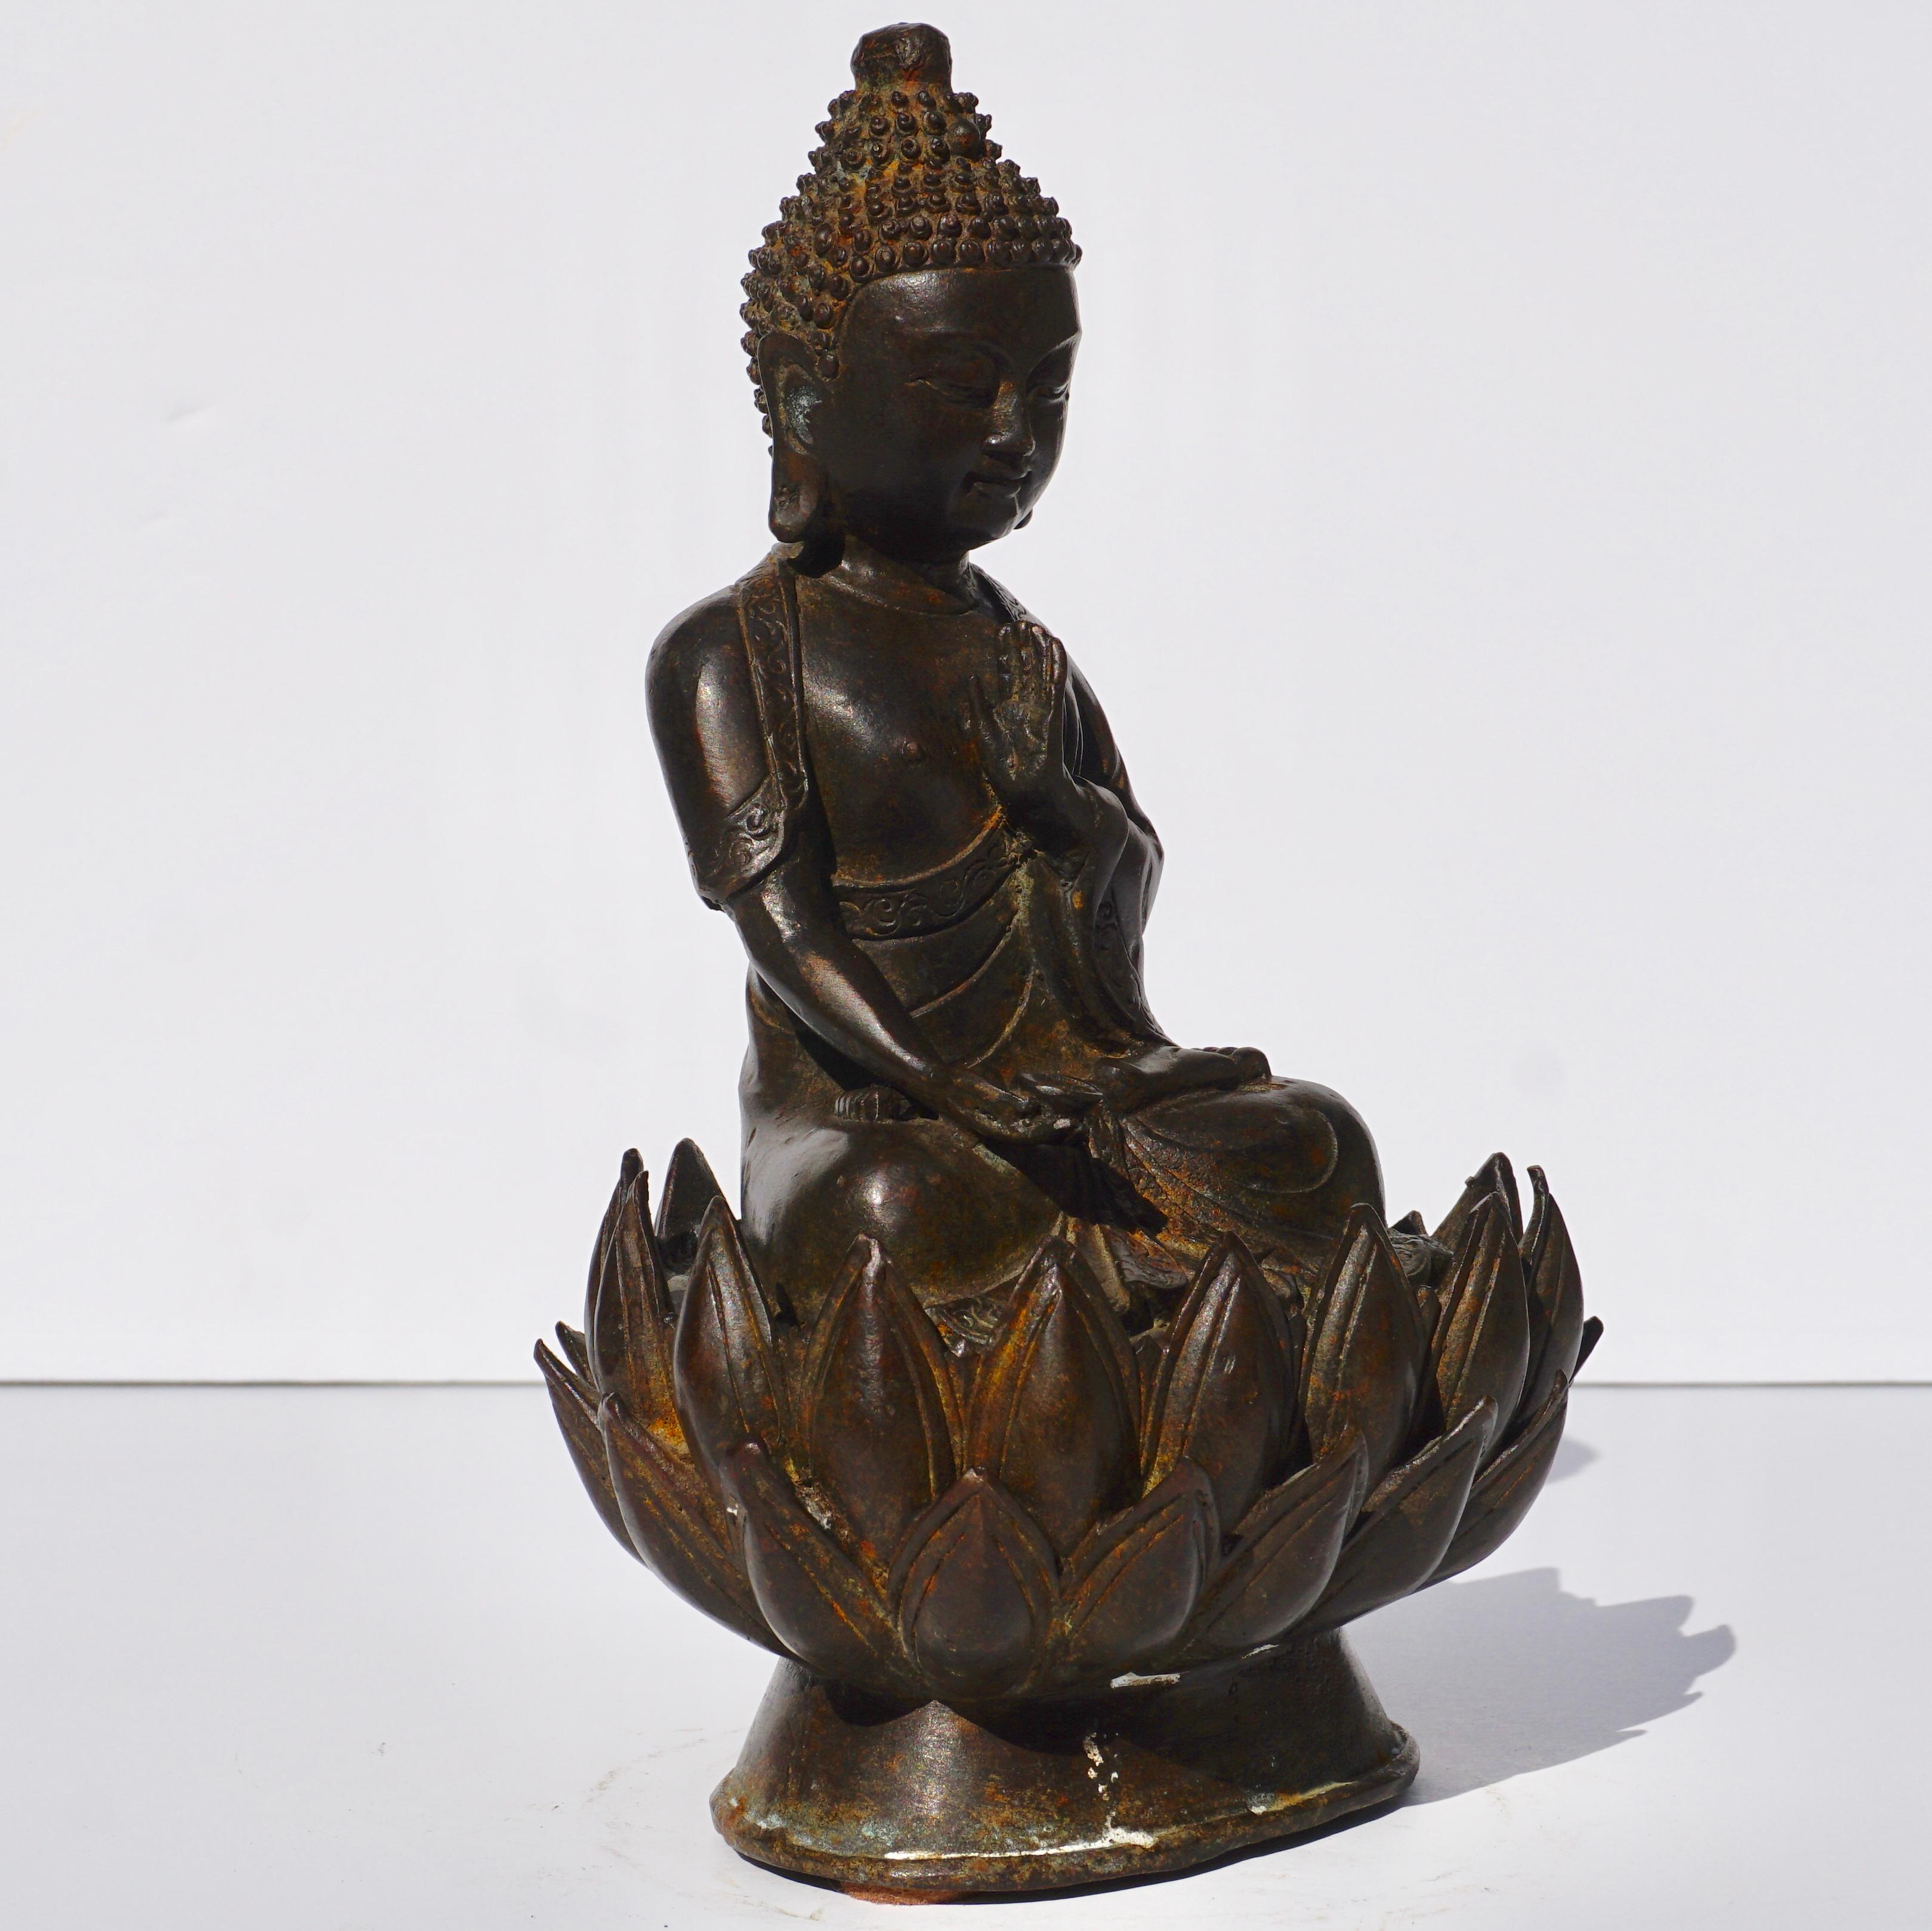 A Chinese bronze medicine Buddha figure, Qing Dynasty, 19th century. The Buddha is seated in dhyanasana on a lotus flower base with the right hand in dhyanamudra holding a bowl filled with myrobalan fruit, and the left hand close to the heart chakra